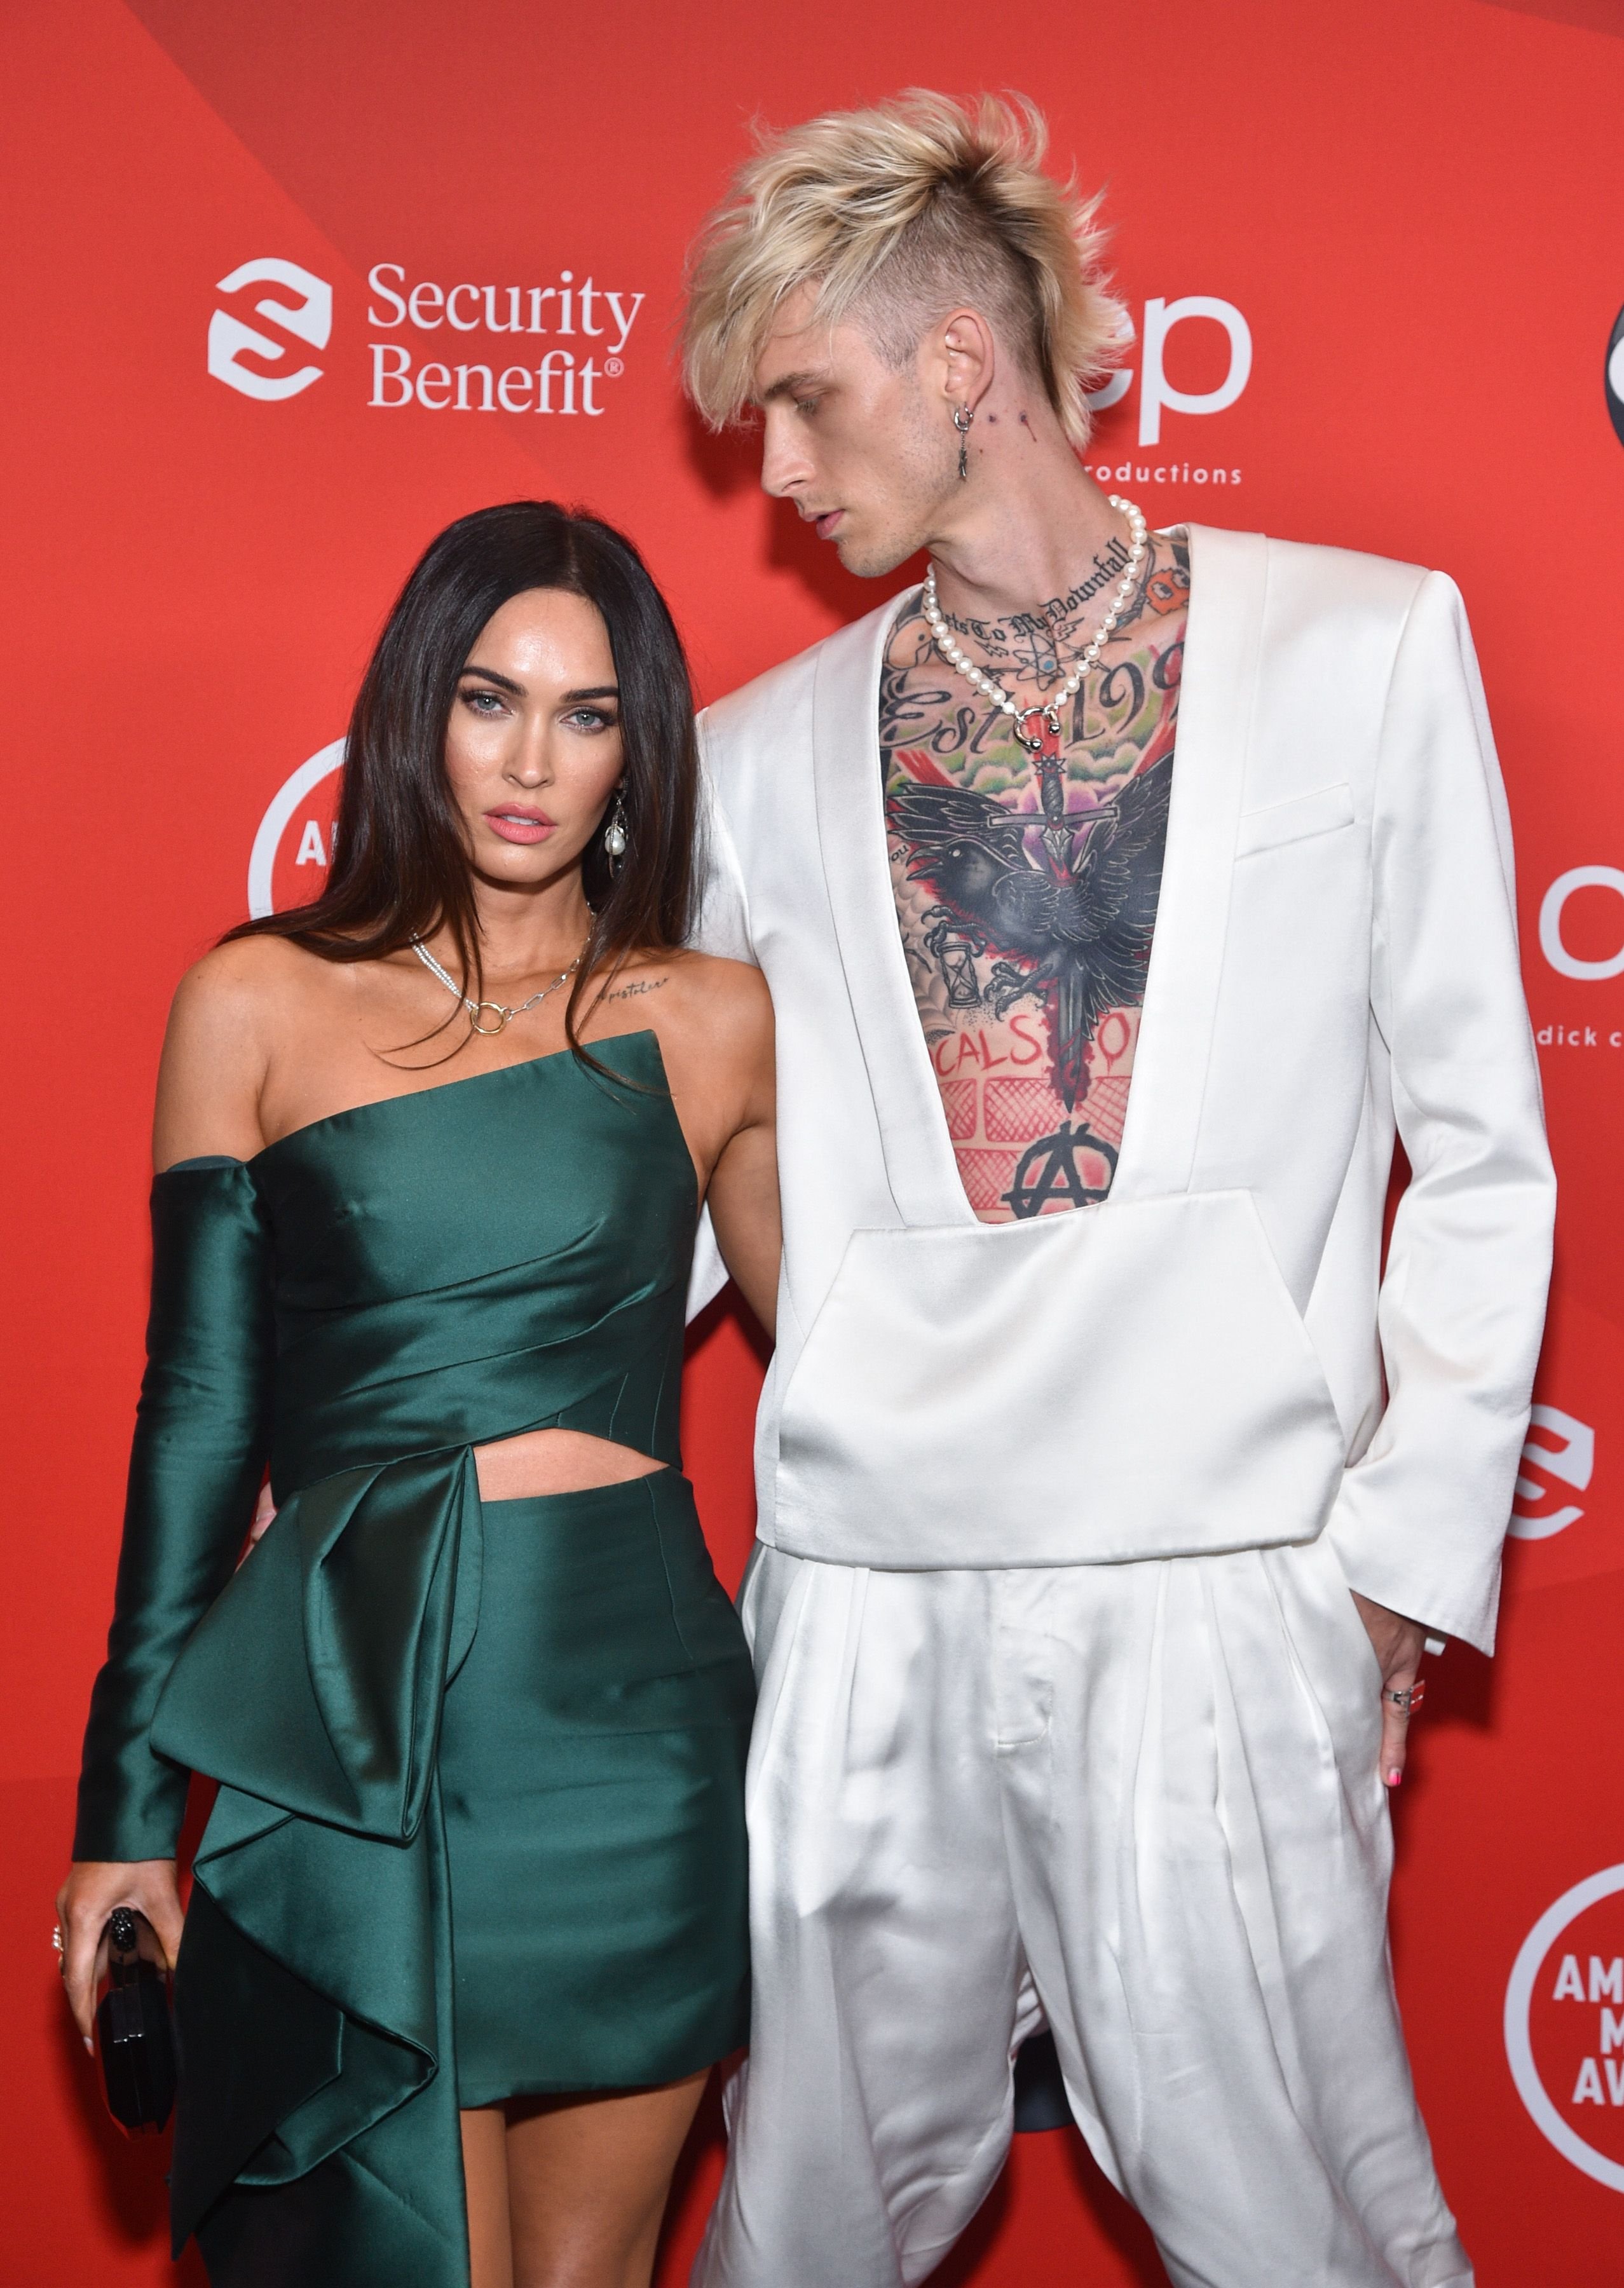 Megan Fox and Machine Gun Kelly at the 2020 American Music Awards in Los Angeles | Source: Getty Images